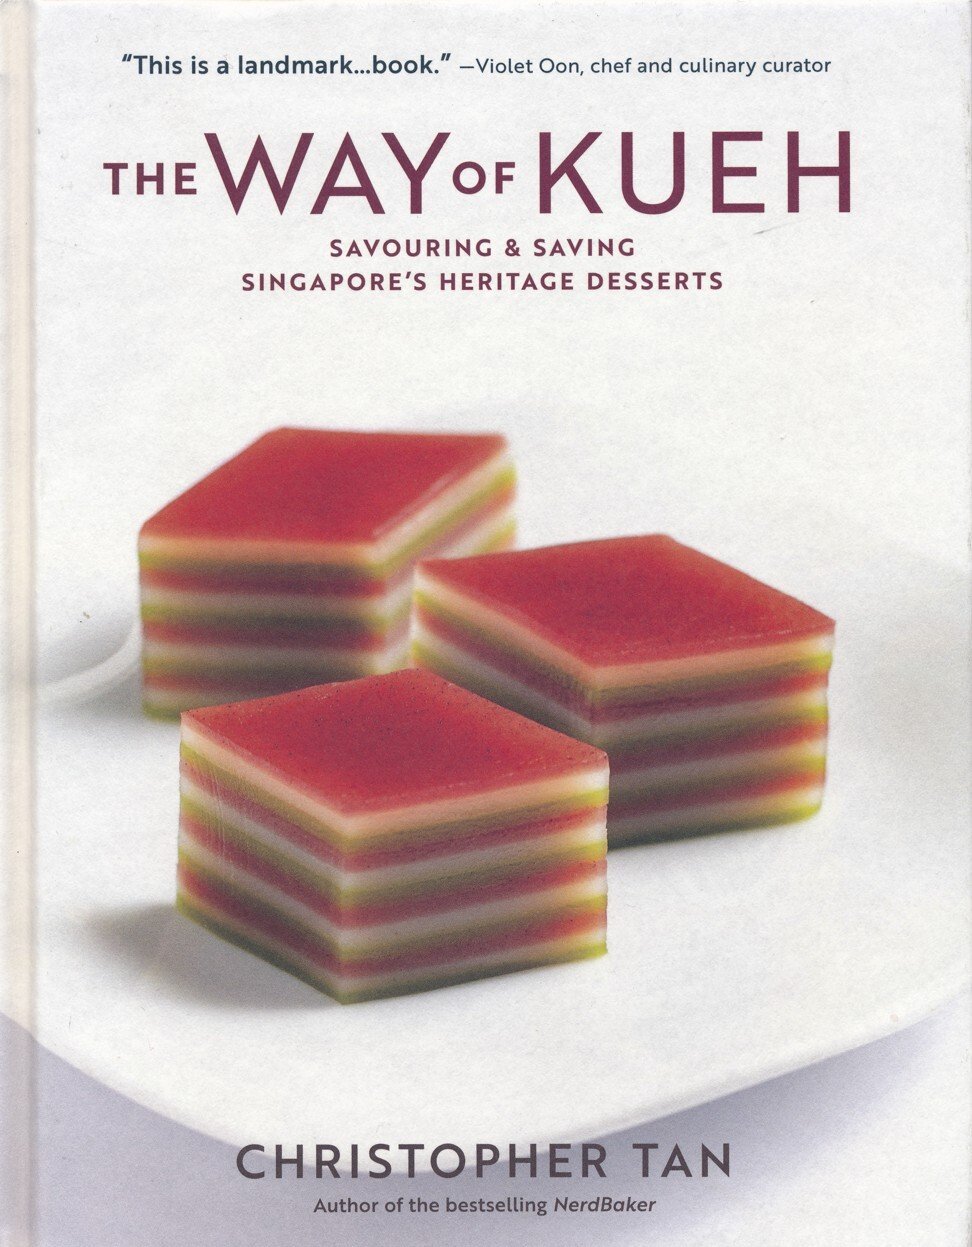 The Way of Kueh – Savouring & Saving Singapore's Heritage Deserts by Christopher Tan. Photo: Handout